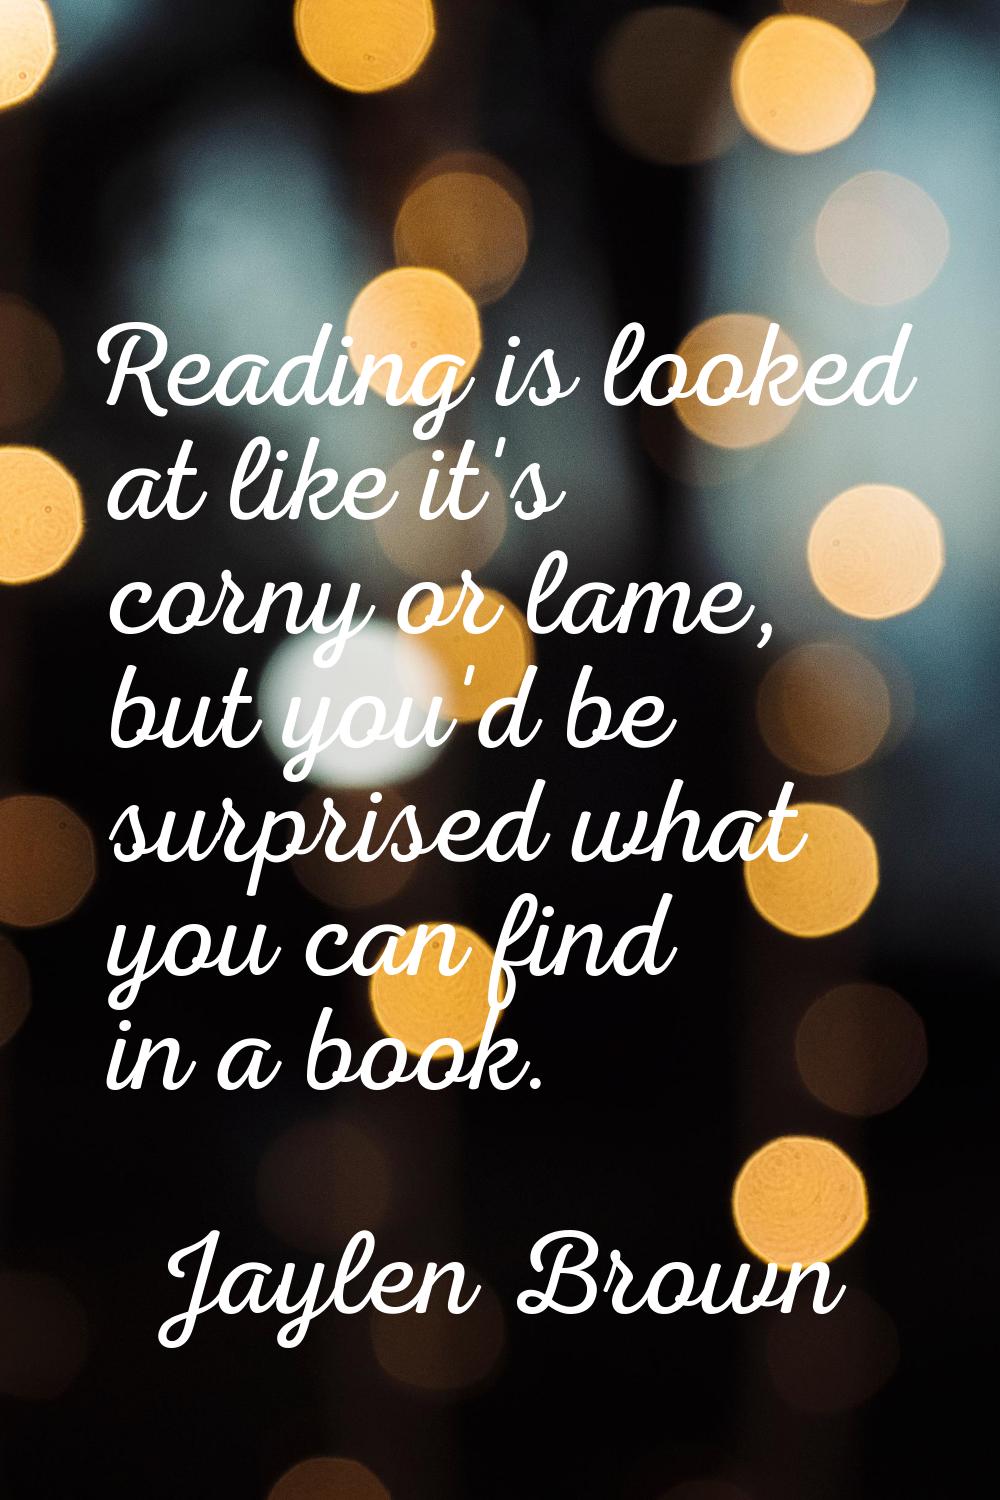 Reading is looked at like it's corny or lame, but you'd be surprised what you can find in a book.